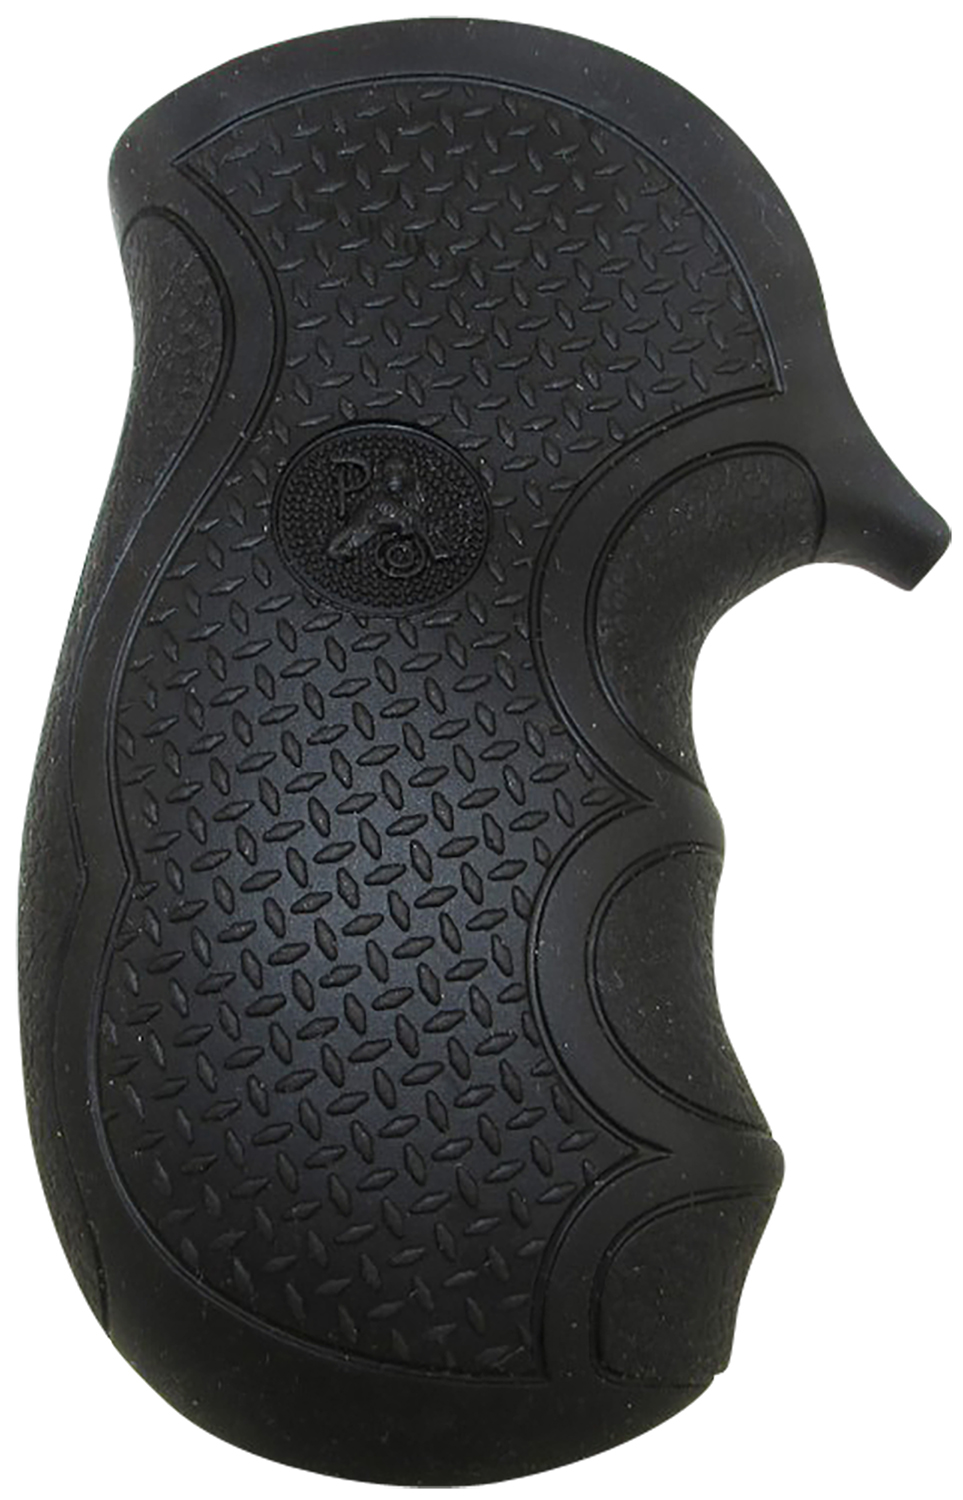 PACHMAYR DIAMOND PRO GRIP RUGER LCR